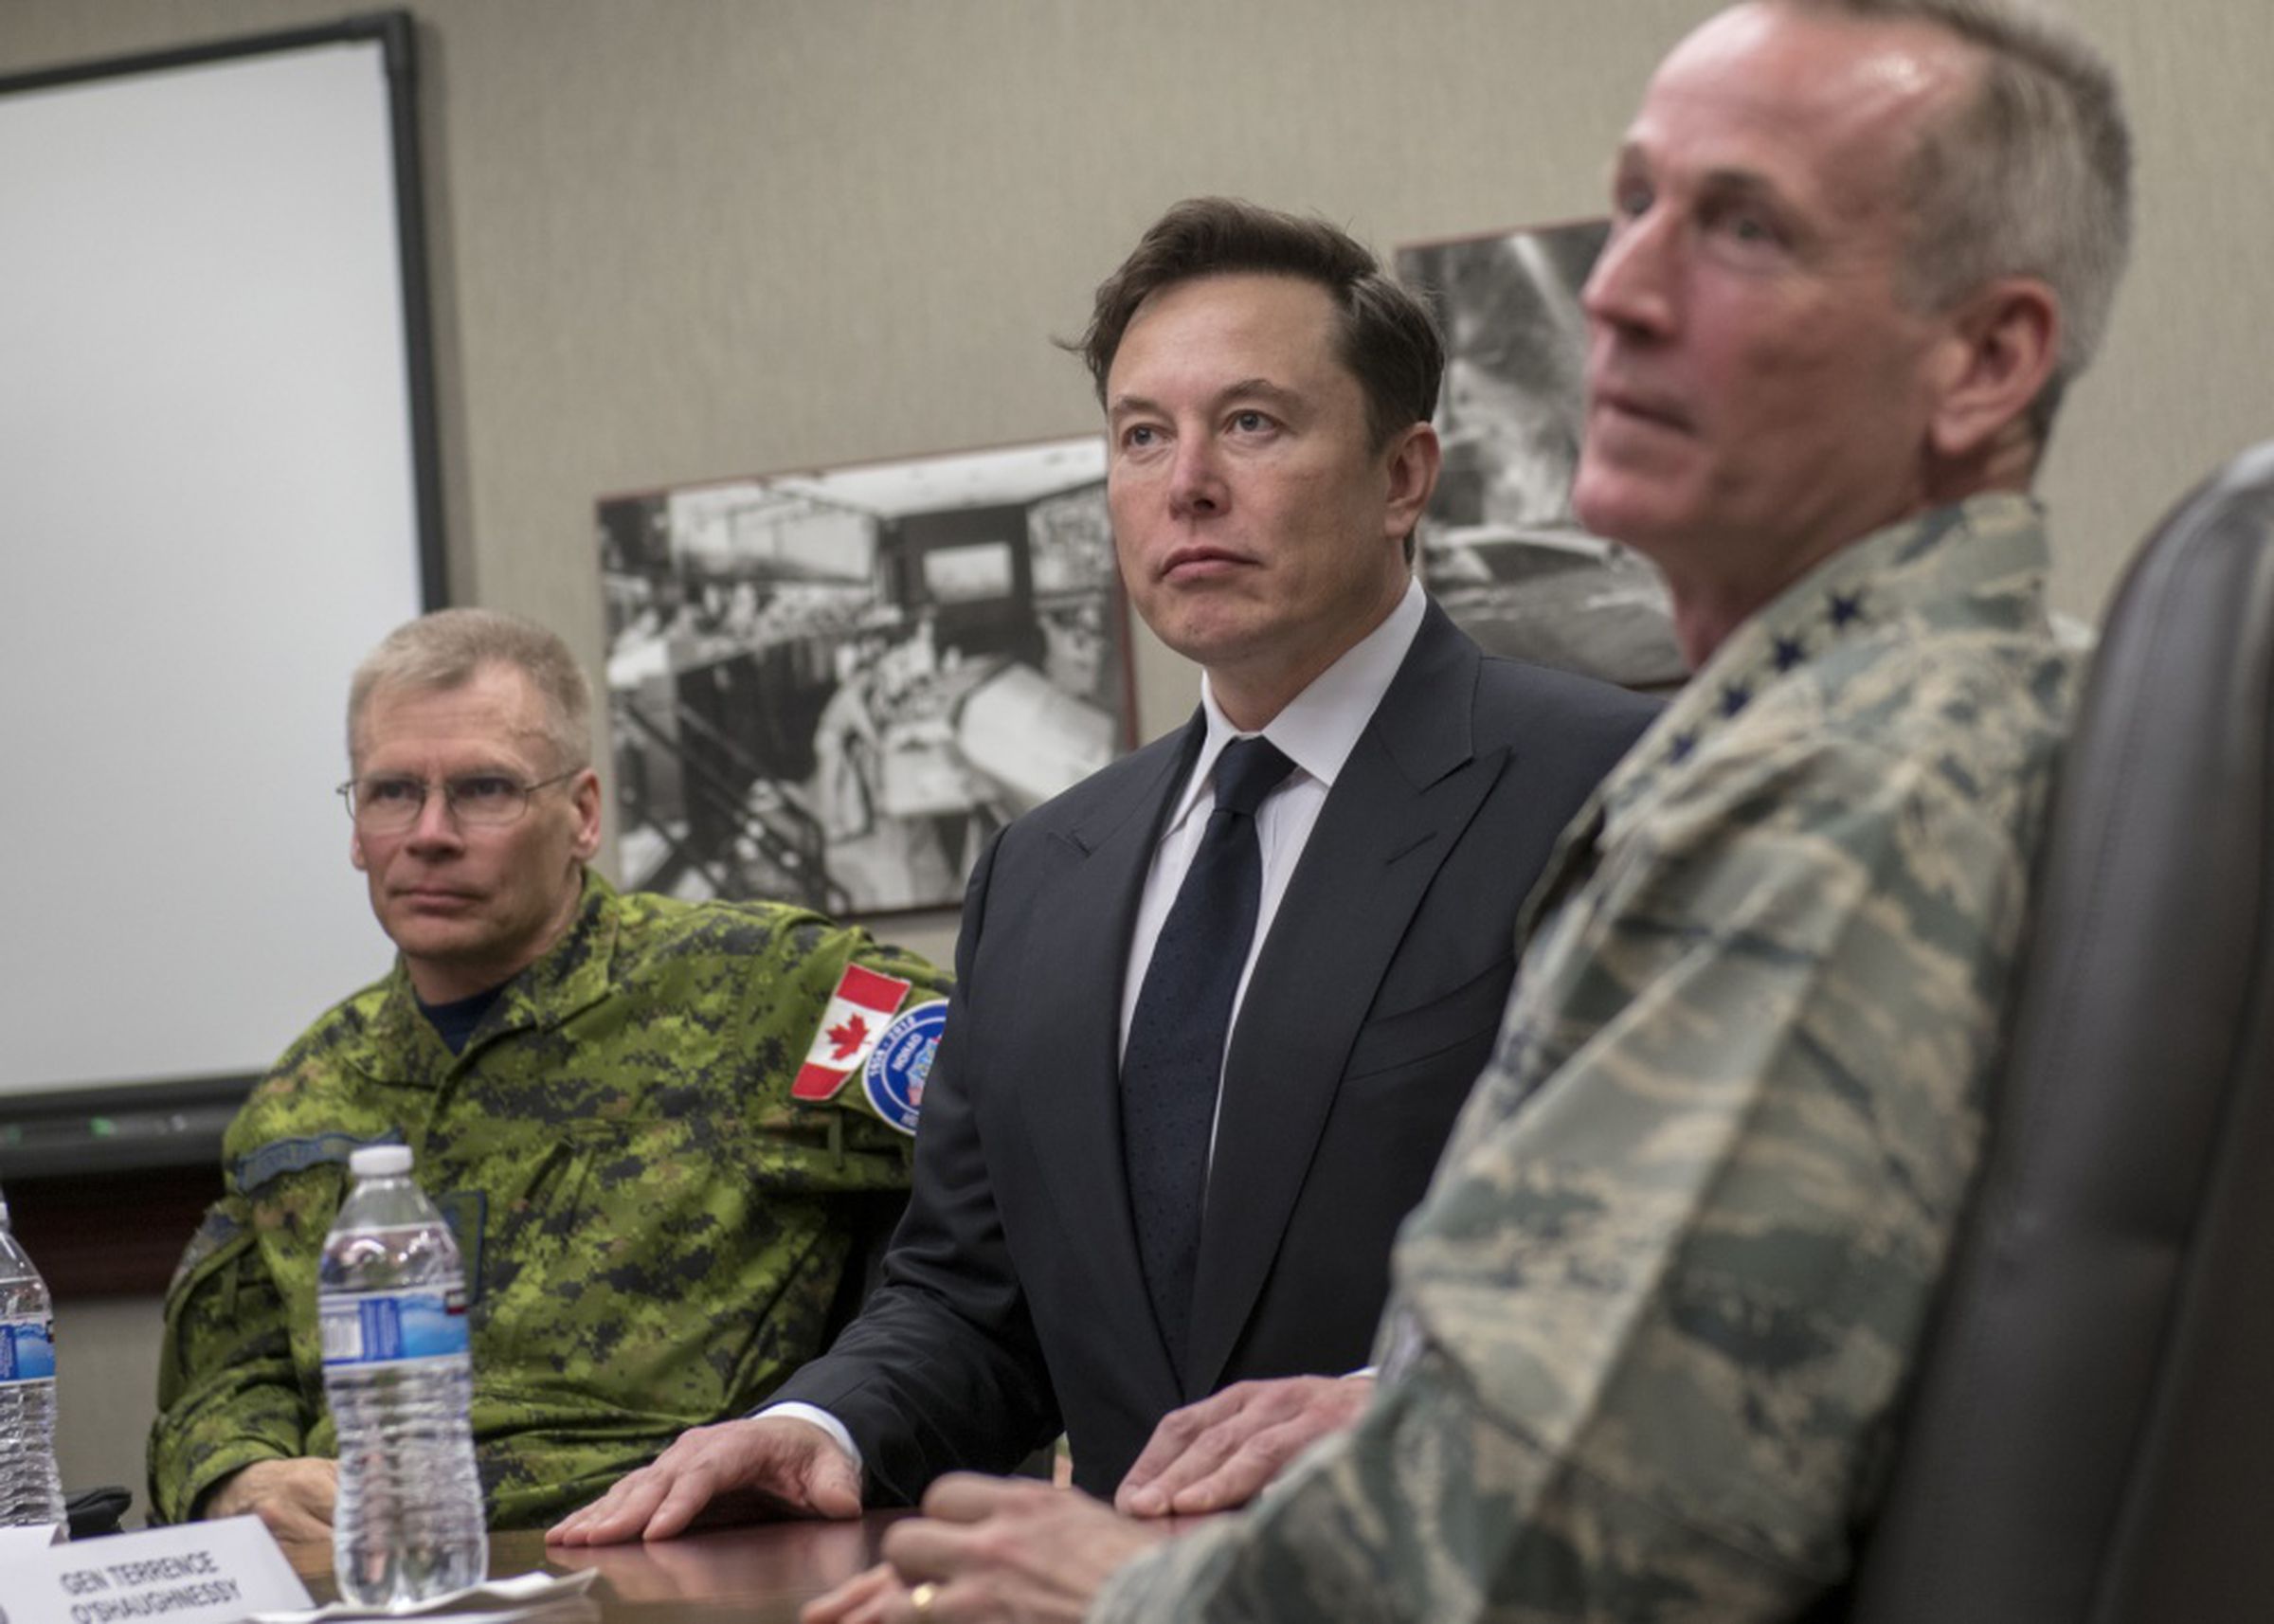 SpaceX CEO Elon Musk meets in Colorado with former NORTHCOM and NORAD commander Ret. Gen. Terrence O’Shaughnessy (right) and Royal Canadian Air Force Lieutenant General Christopher Coates (left) in April 2019.